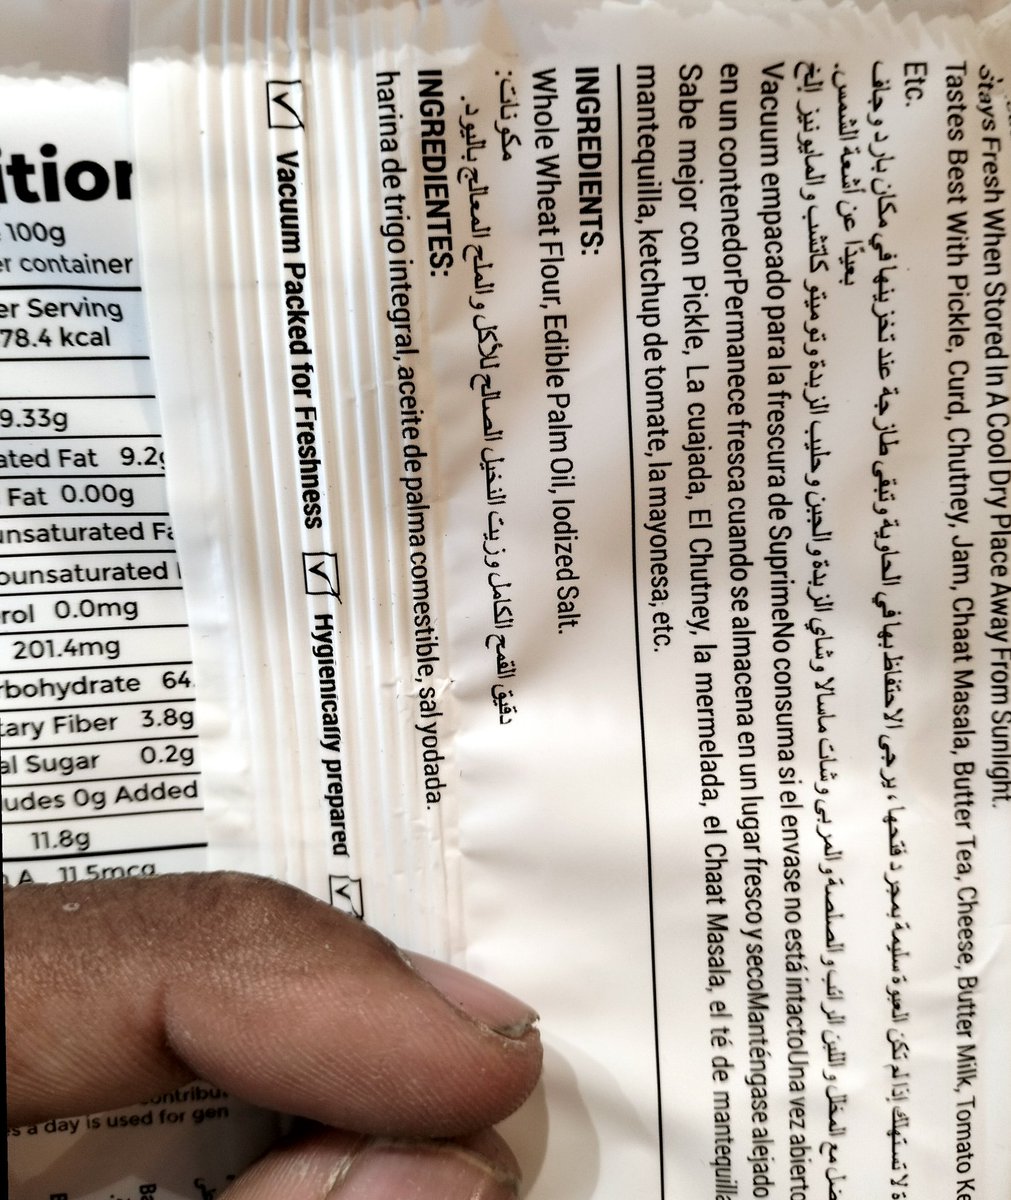 'Diet Plain Khakhra'

64gms Carbs, Edible Palm oil as ingredient. But who cares right, it's low in Calories 🥴

#ReadTheLabel